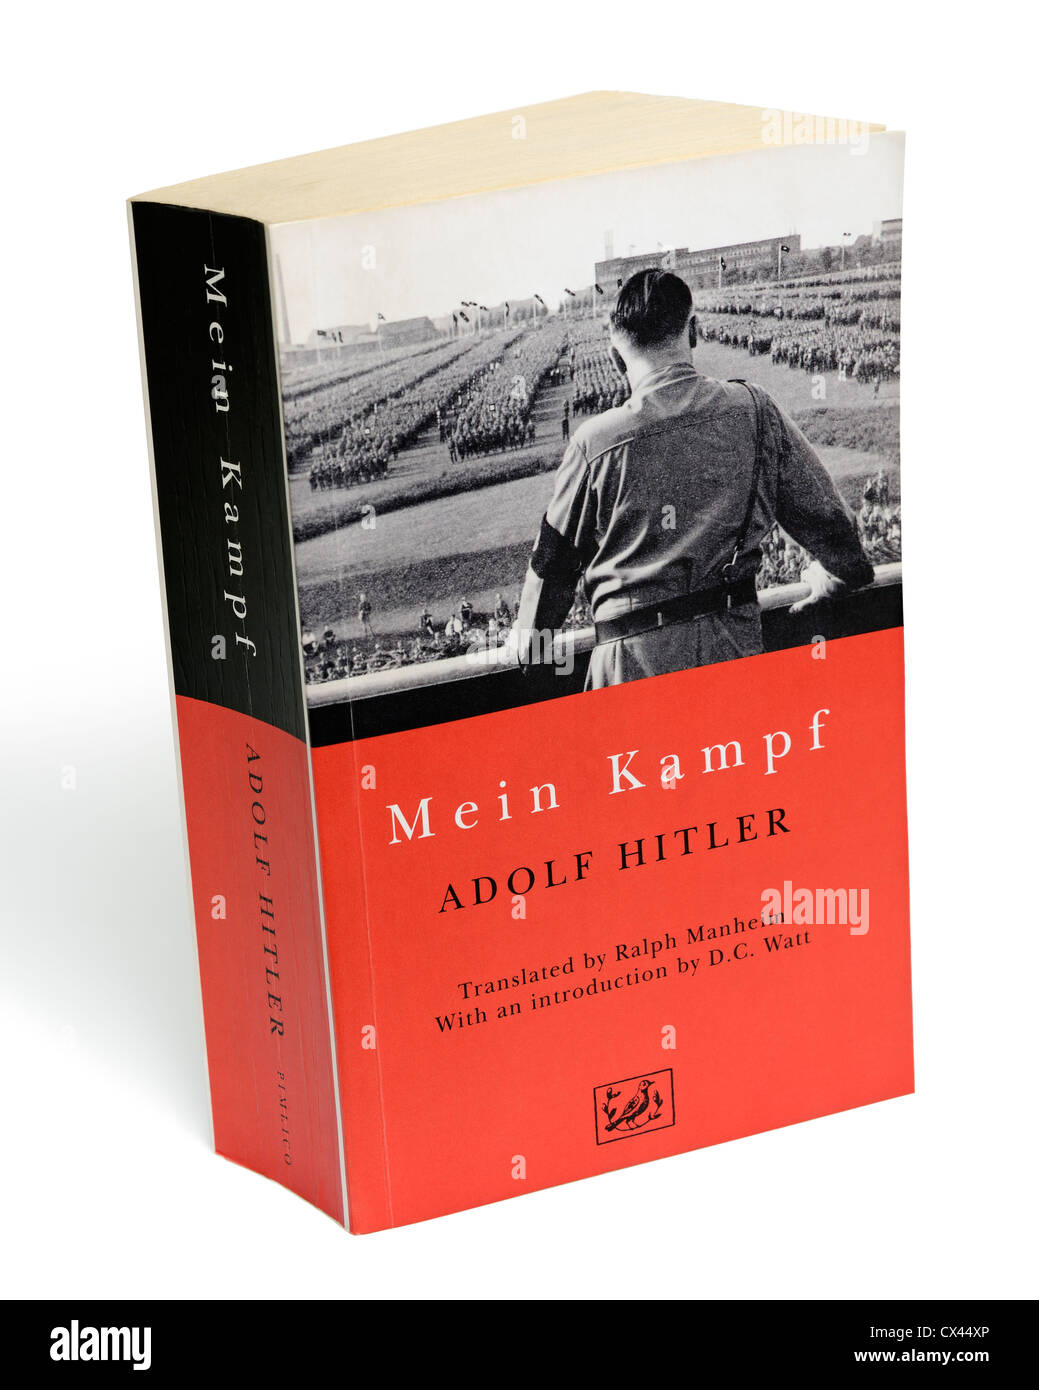 Mein Kampf. Book by Adolf Hitler, Containing His Autobiography and Nazi Political Ideology. Stock Photo